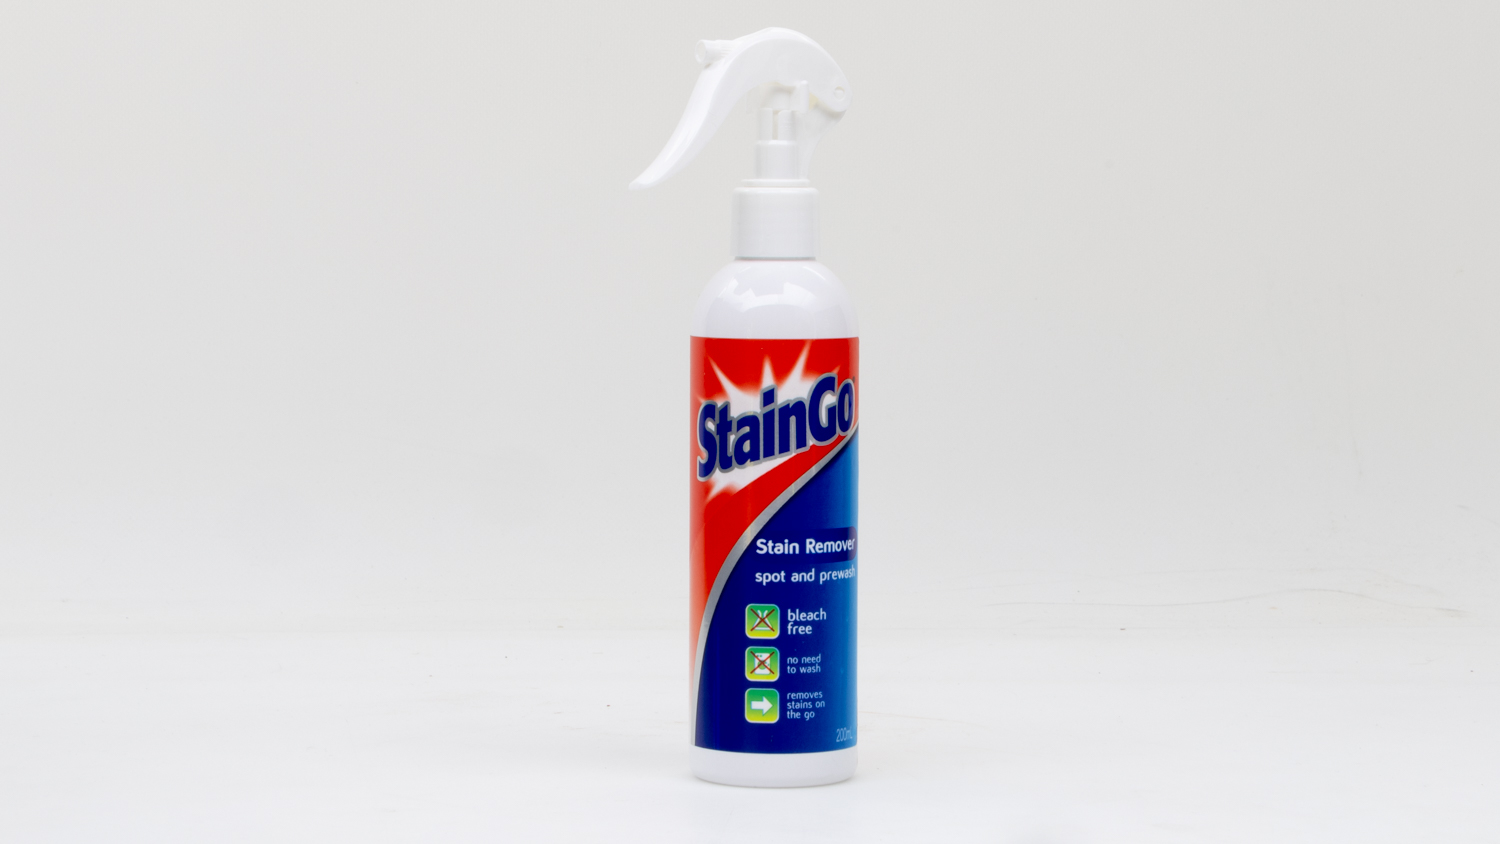 StainGo Stain Remover Spot and Prewash carousel image